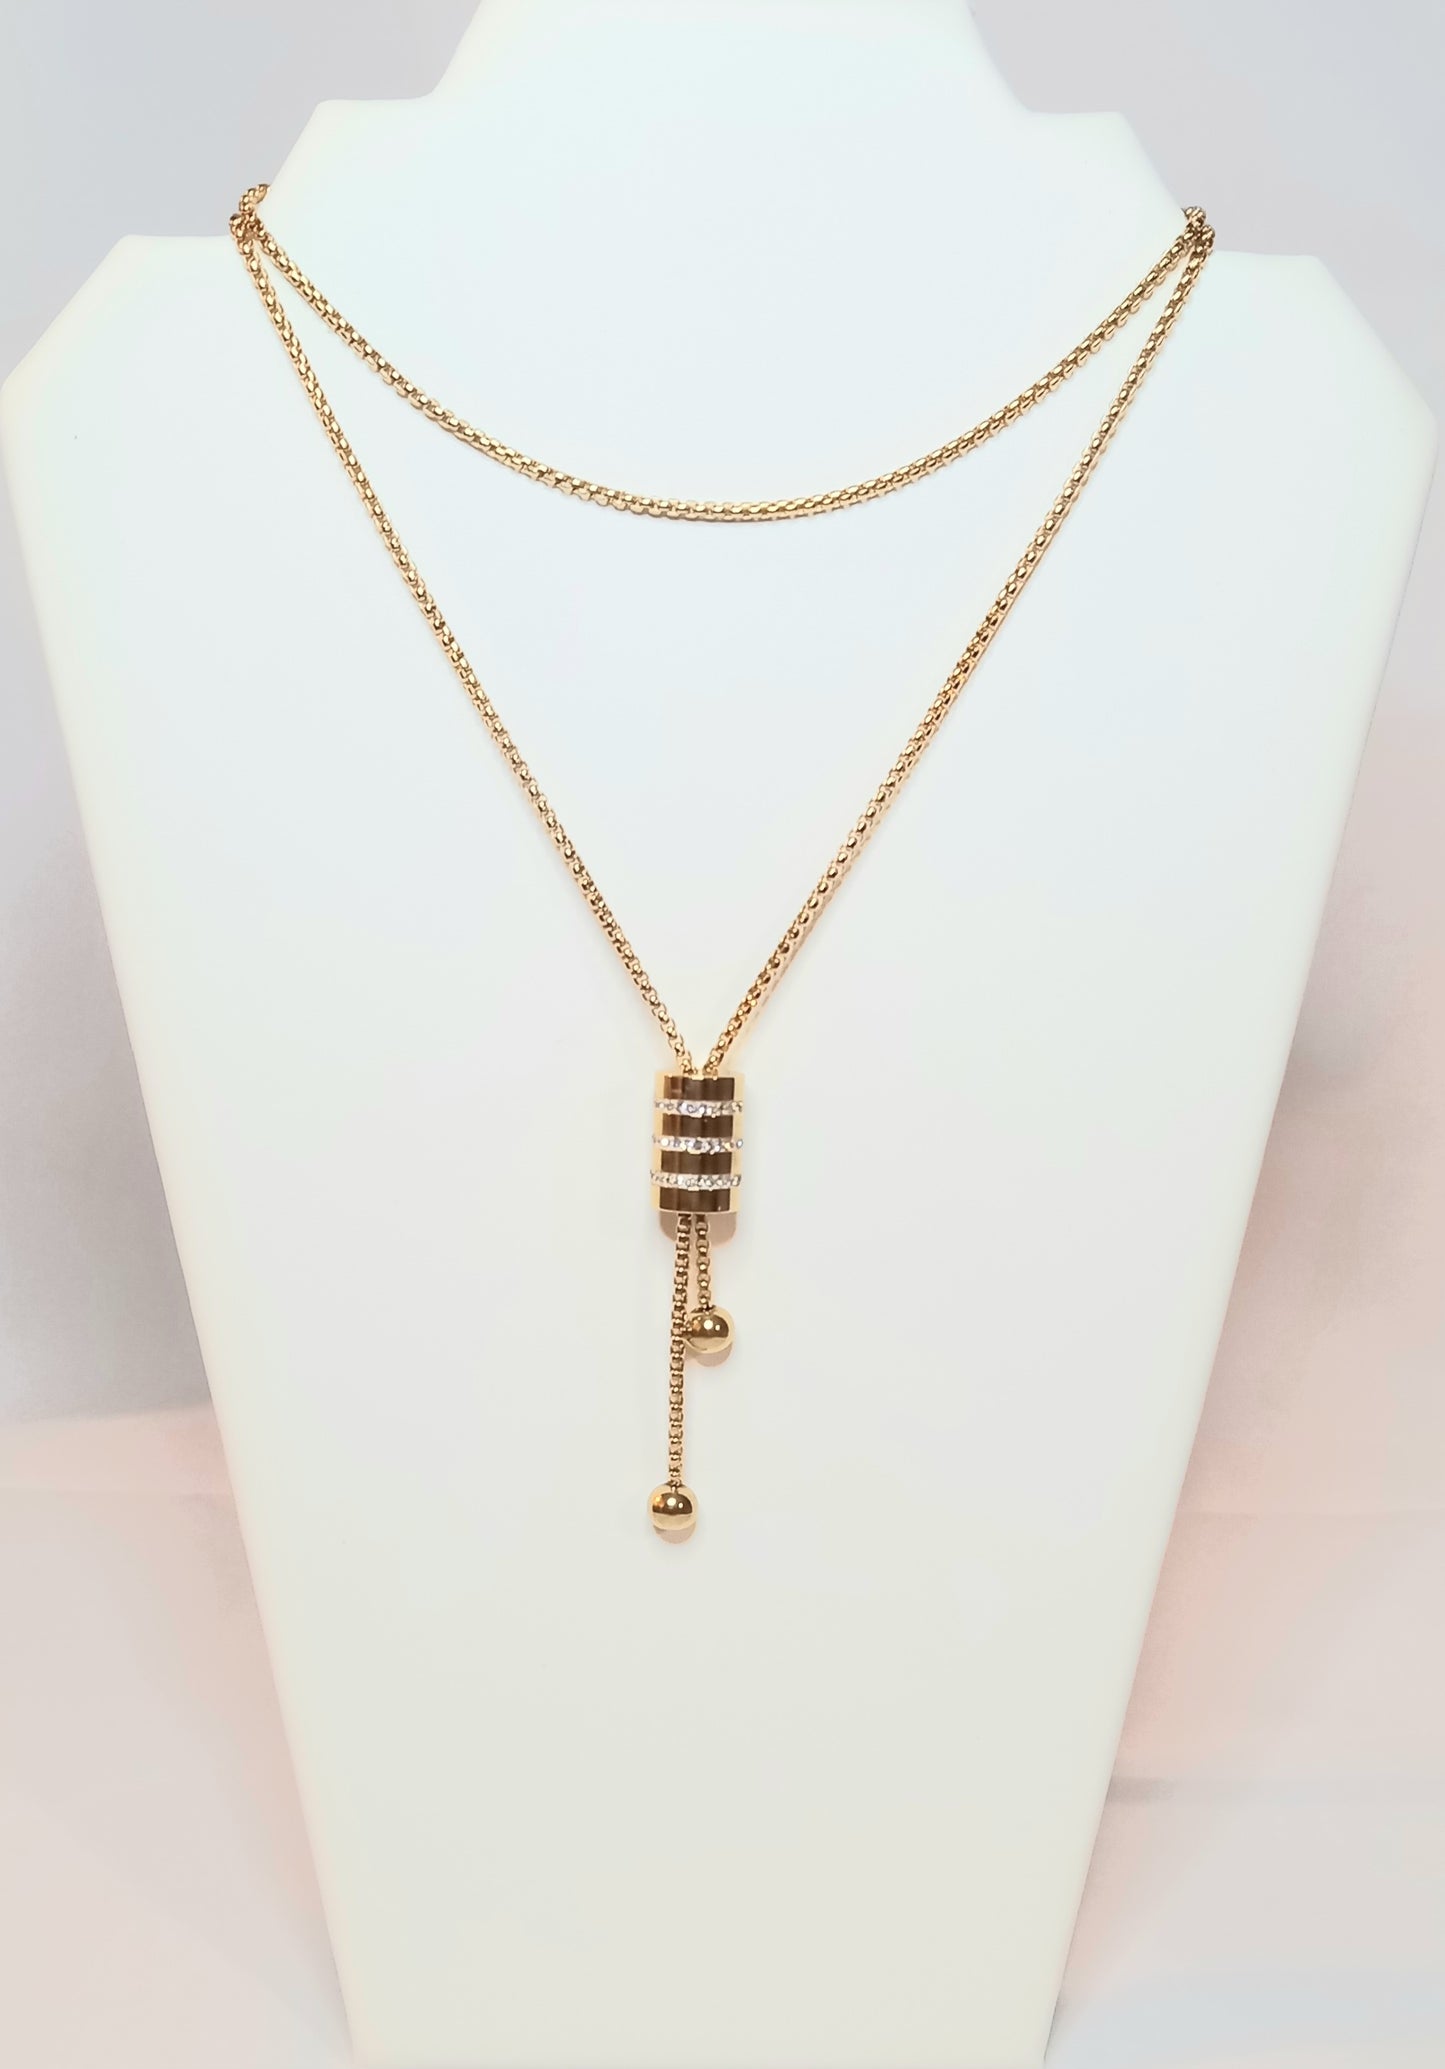 Neith gold necklace